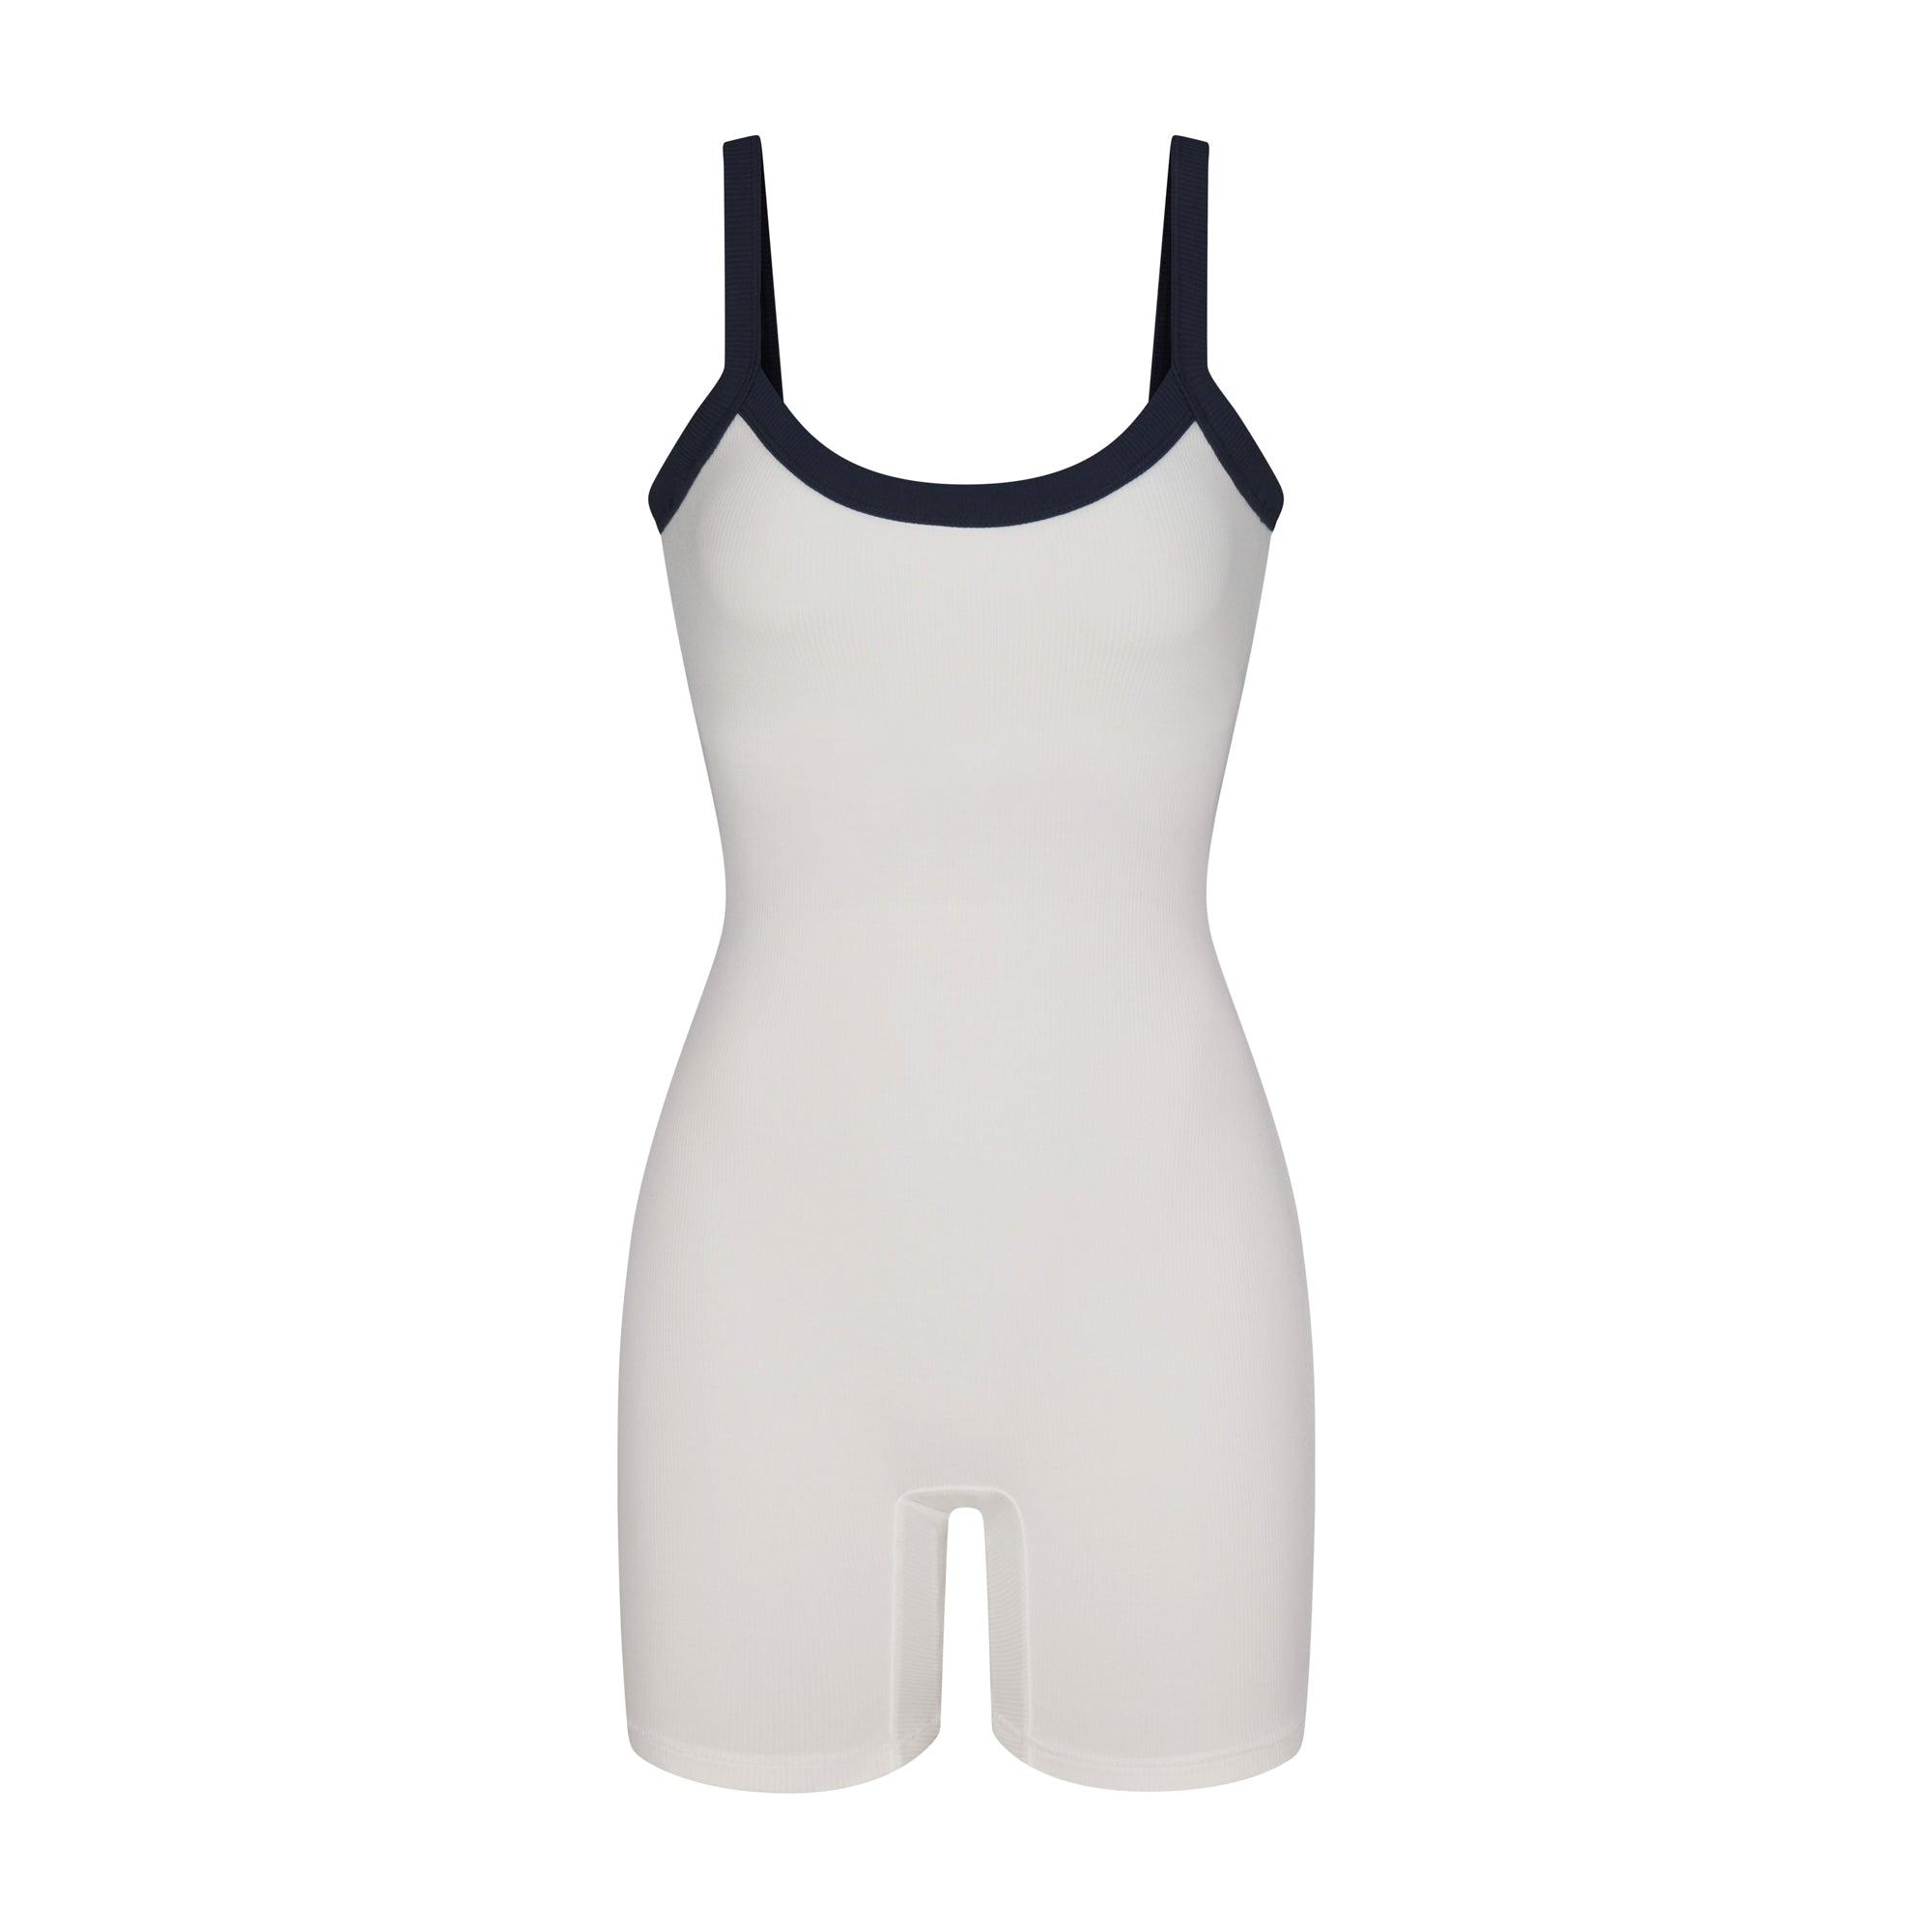 Skims Cotton Rib Picot Tank Bodysuit In Stock Availability and Price